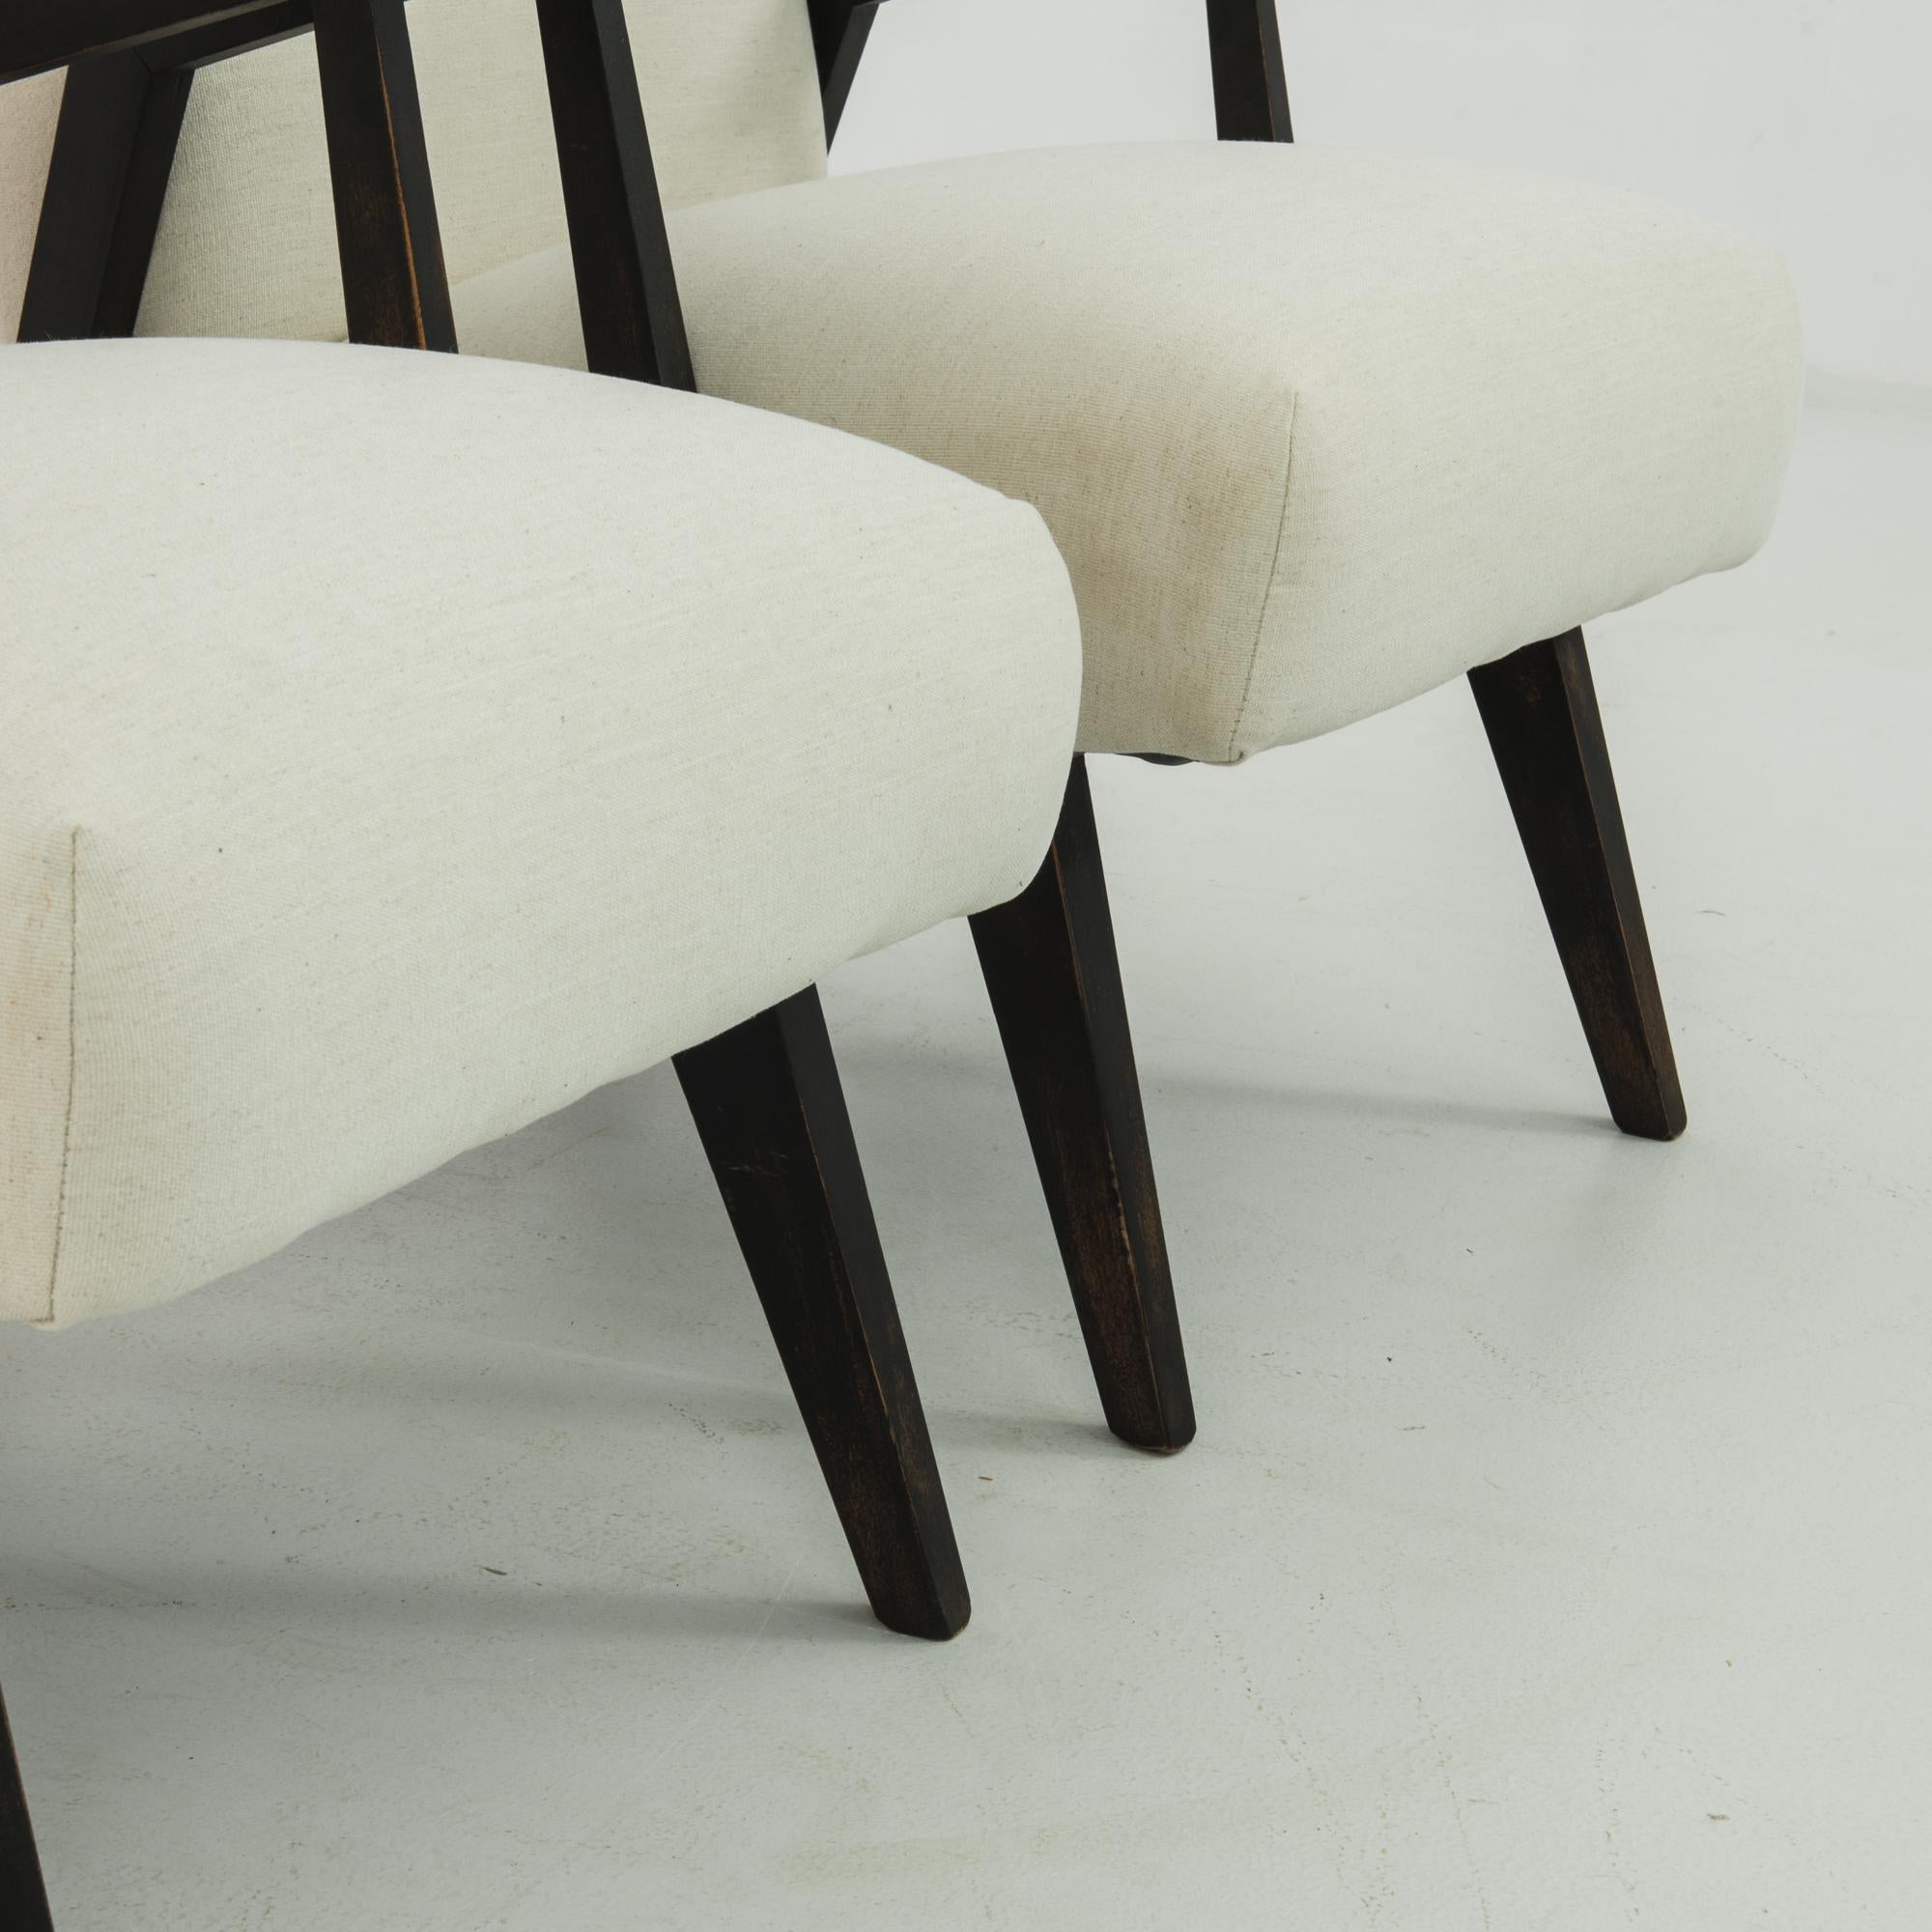 1940s Czech White Upholstered Armchairs, a Pair For Sale 1